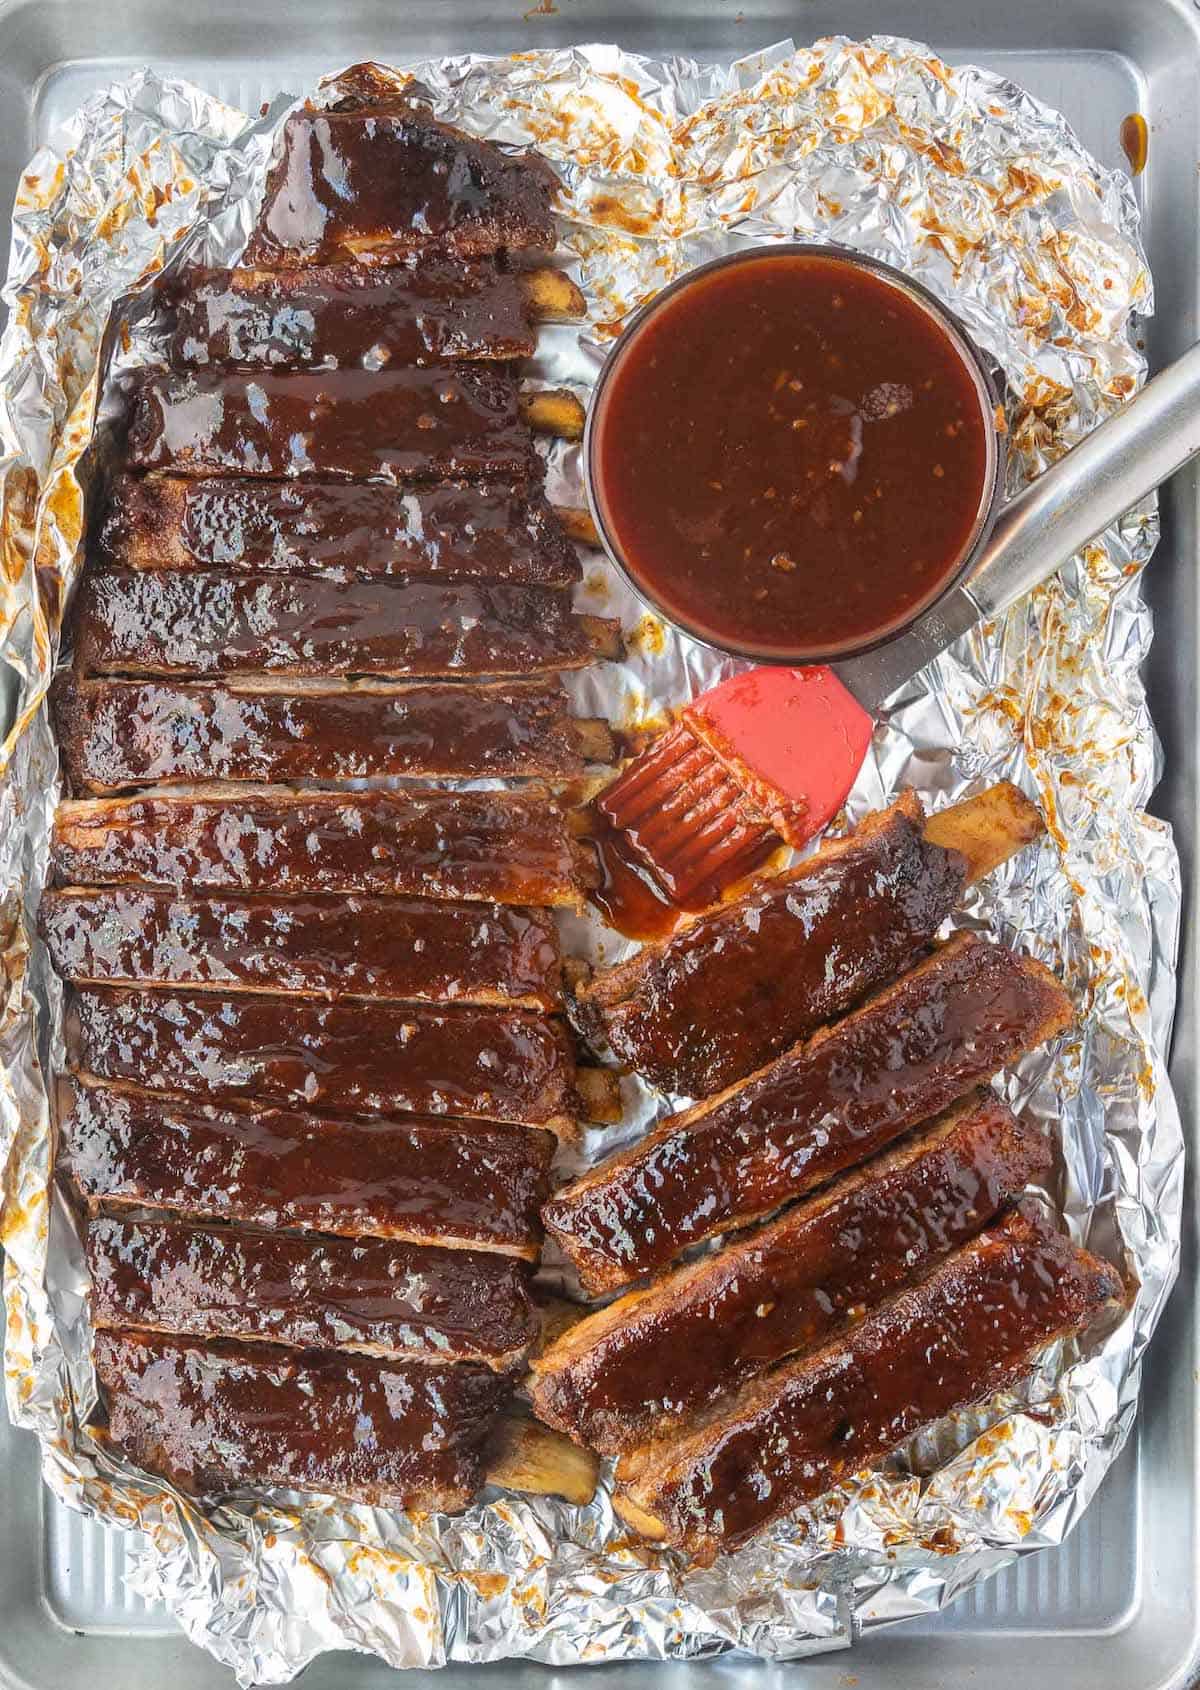 Baked ribs on foil with a side of bbq sauce.